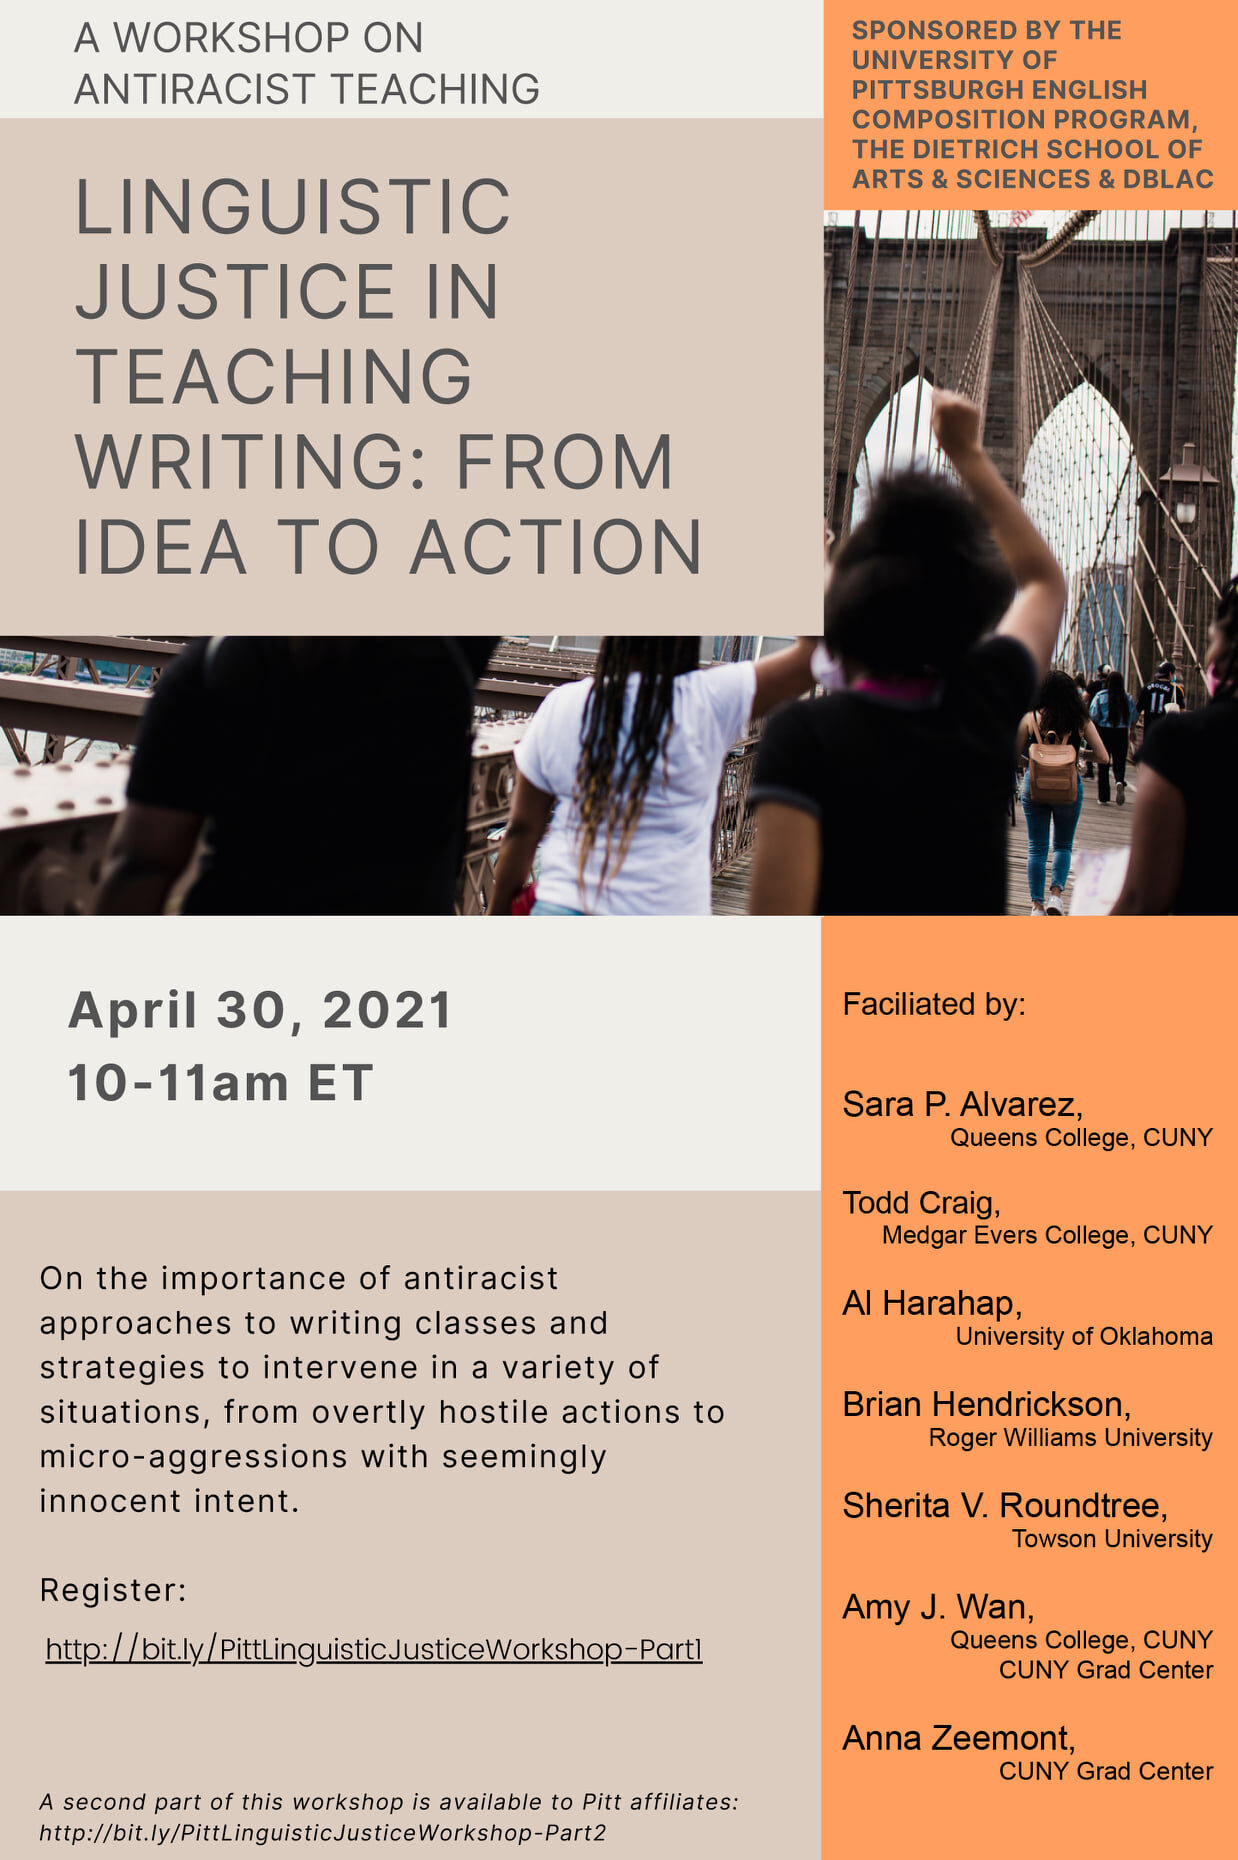 Poster for Event: An Antiracist Workshop, Linguistic Justice in Teaching Writing: From Idea to Action. April 30, 10-11am ET, sponsored by University of Pittsburgh English Composition Program, Dietrich School of Arts & Sciences and DBLAC,